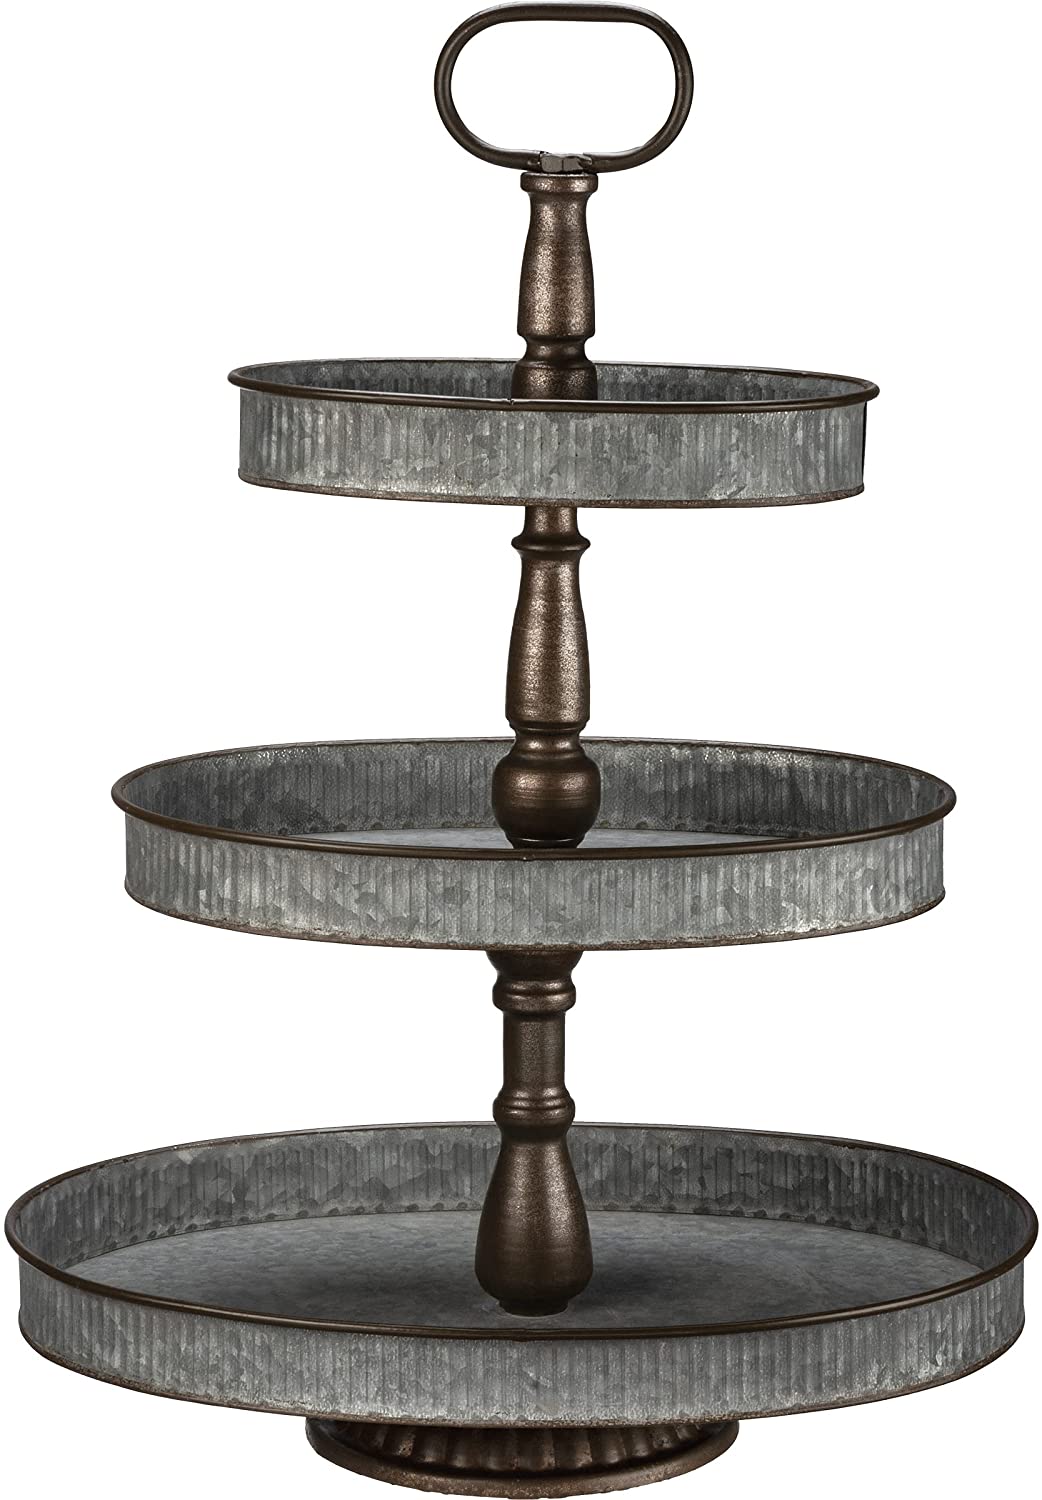 3 Tier Tray- Metal Oval